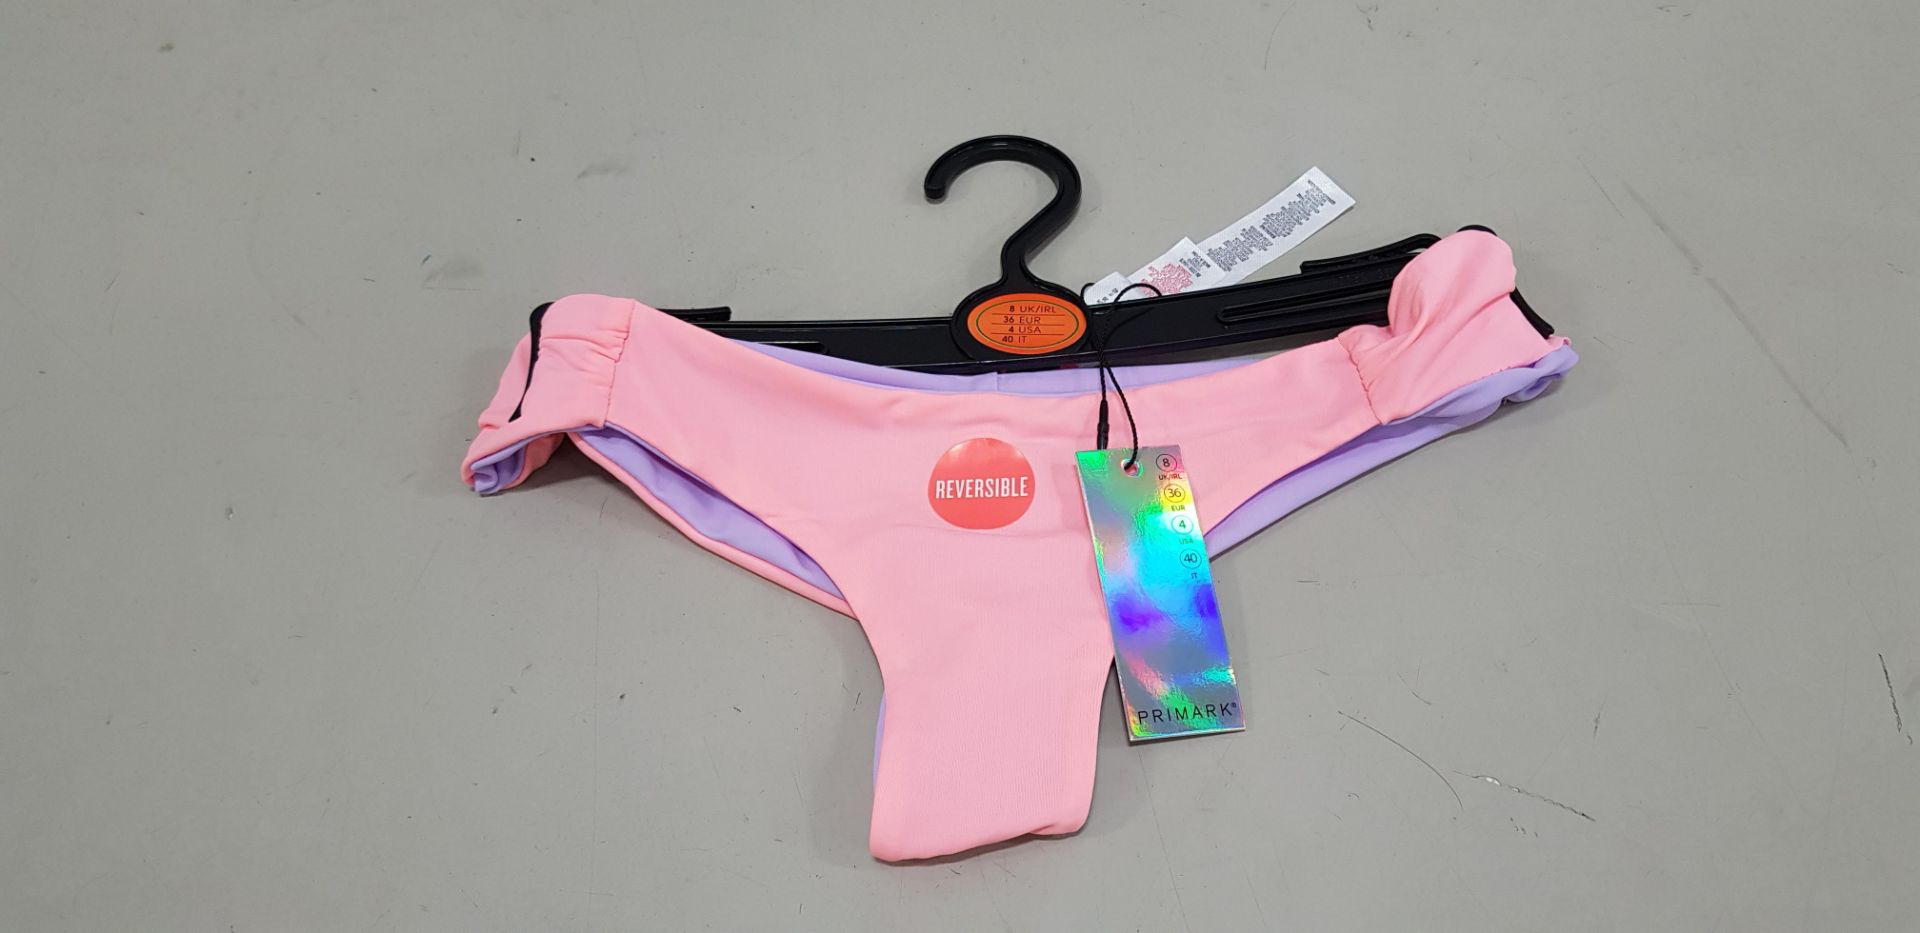 120 X BRAND NEW PRIMARK REVERSIBLE CORAL AND LILAC BIKINI BOTTOMS IN ALL RATIO SIZES 6-18 RRP €5.